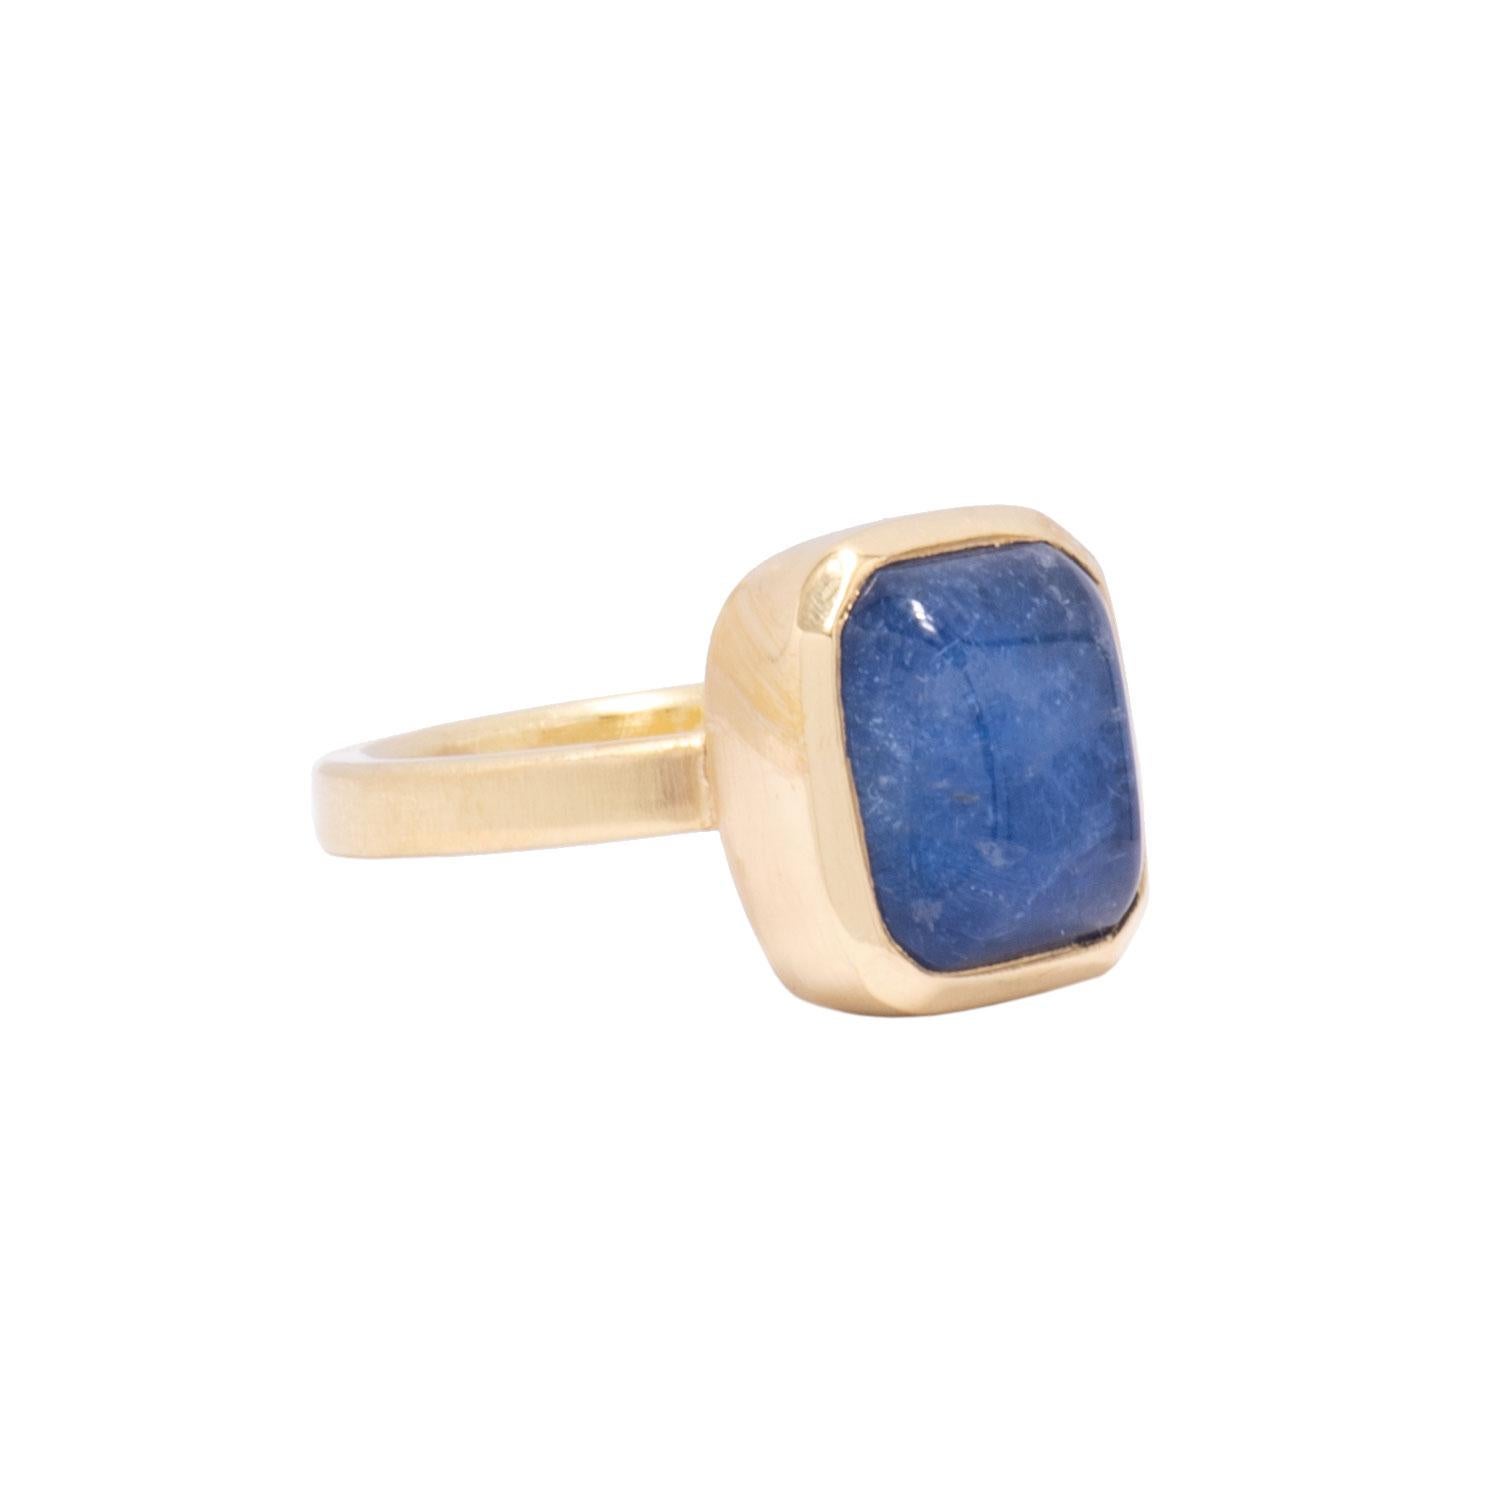 A cushiony Blue Dumortierite Quartz cabochon is bezel set in 18 karat gold like a denim pillow. A simple setting enhances and highlights the intense blue and the cabochon cut displays the subtle streaks of color within. Hand crafted in our studio,